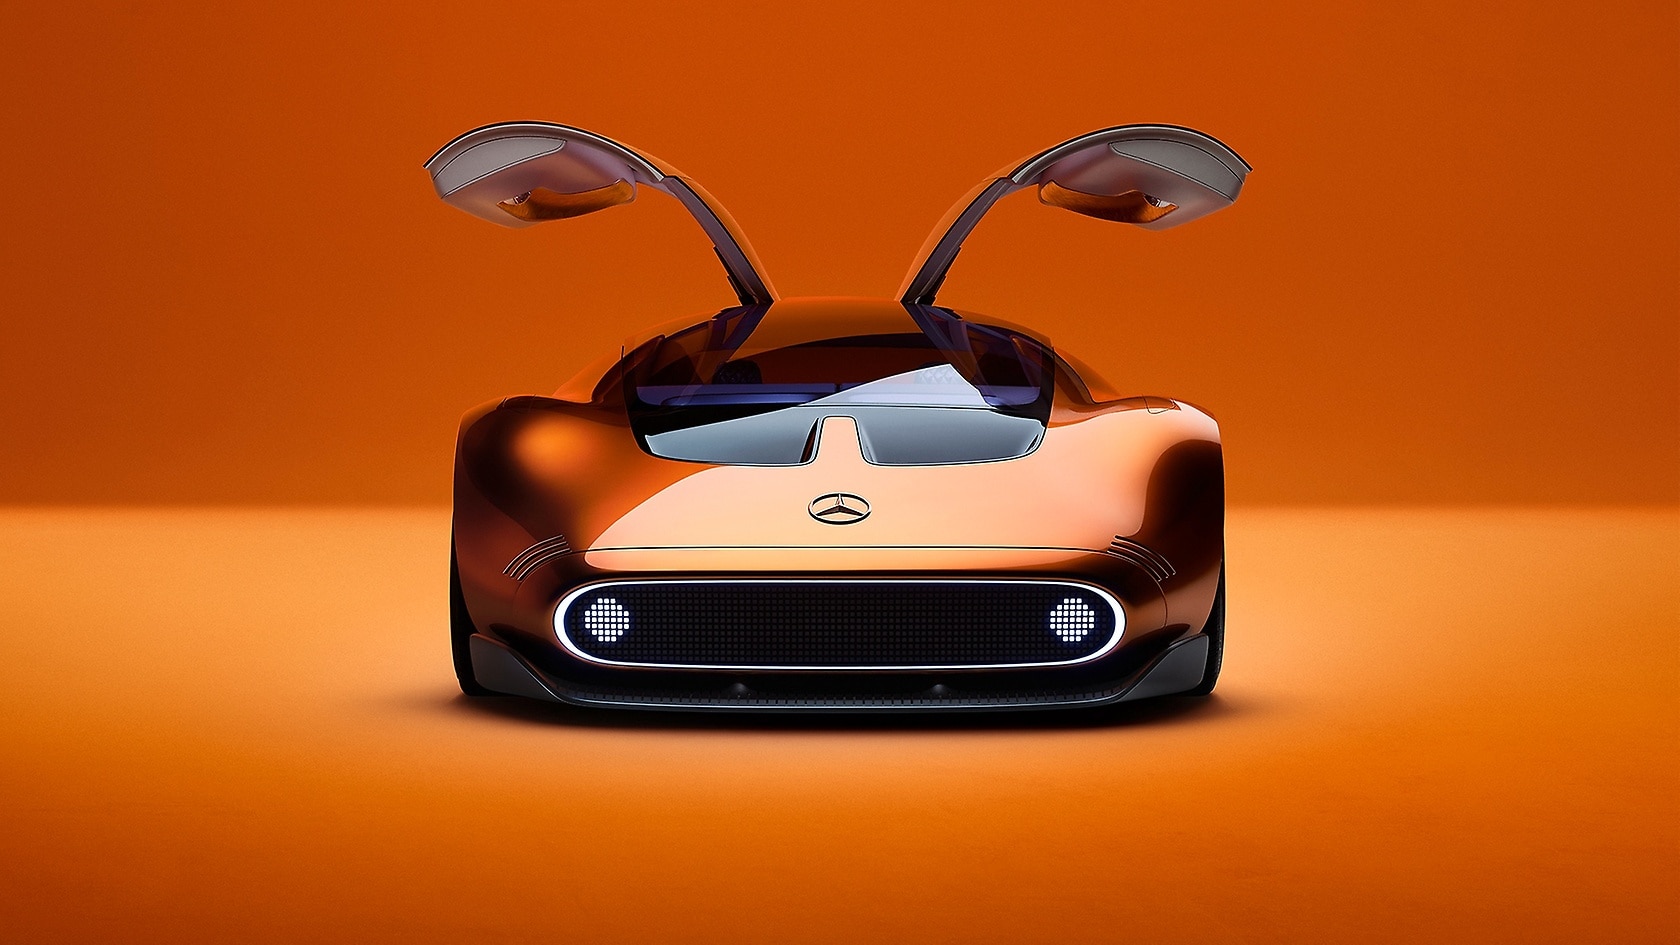 The orange and black gullwing doors make the sports car a design icon.